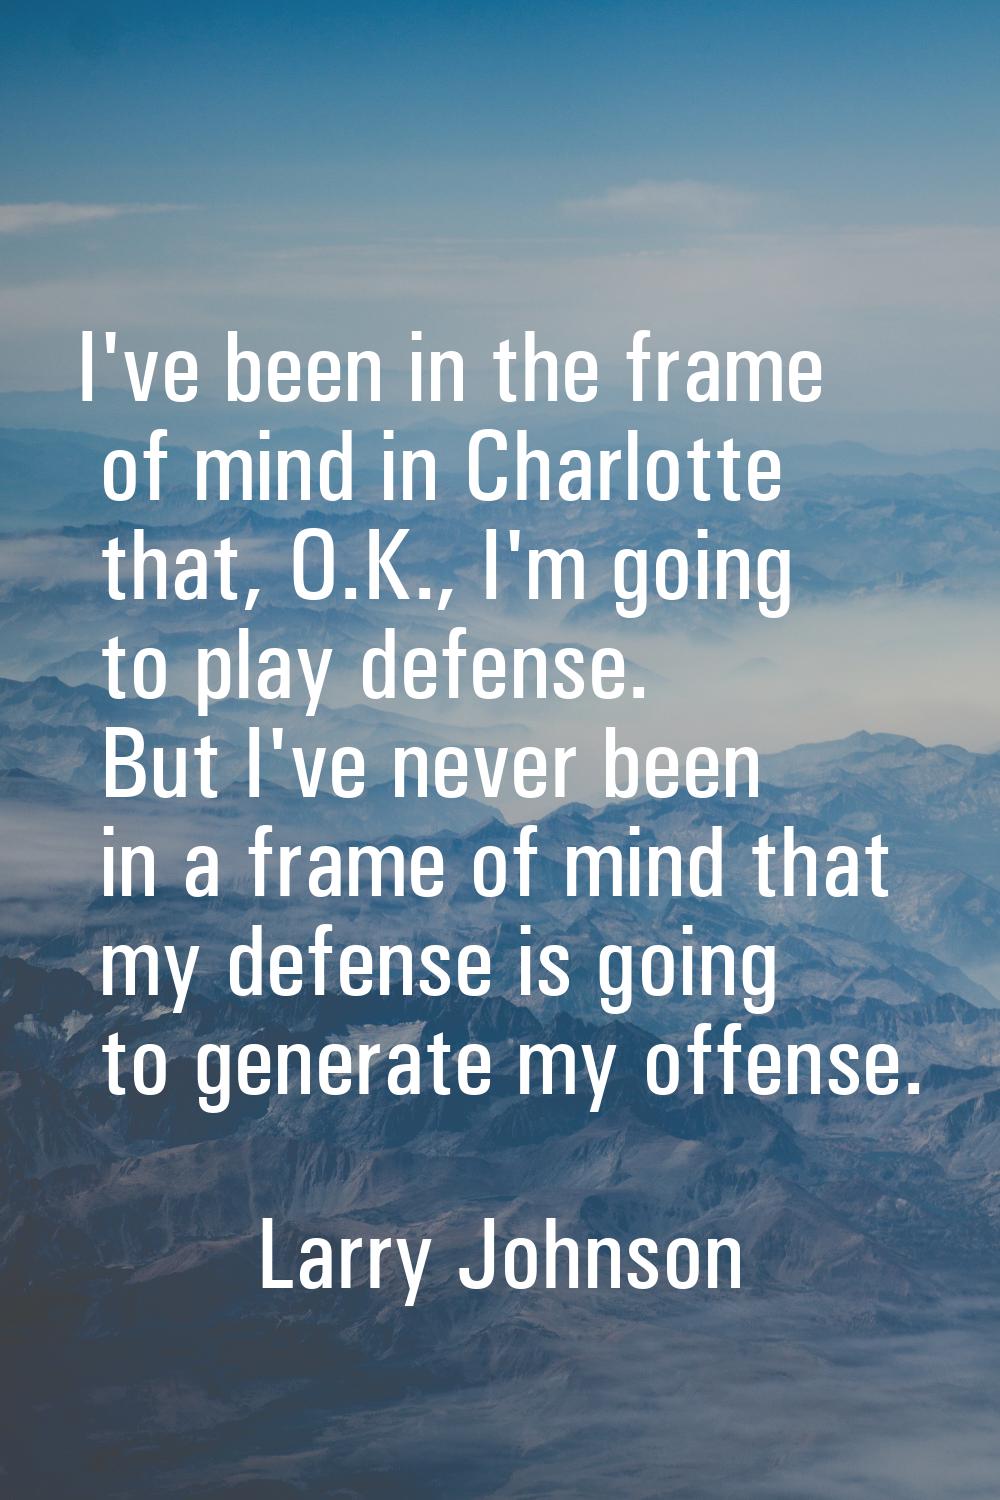 I've been in the frame of mind in Charlotte that, O.K., I'm going to play defense. But I've never b